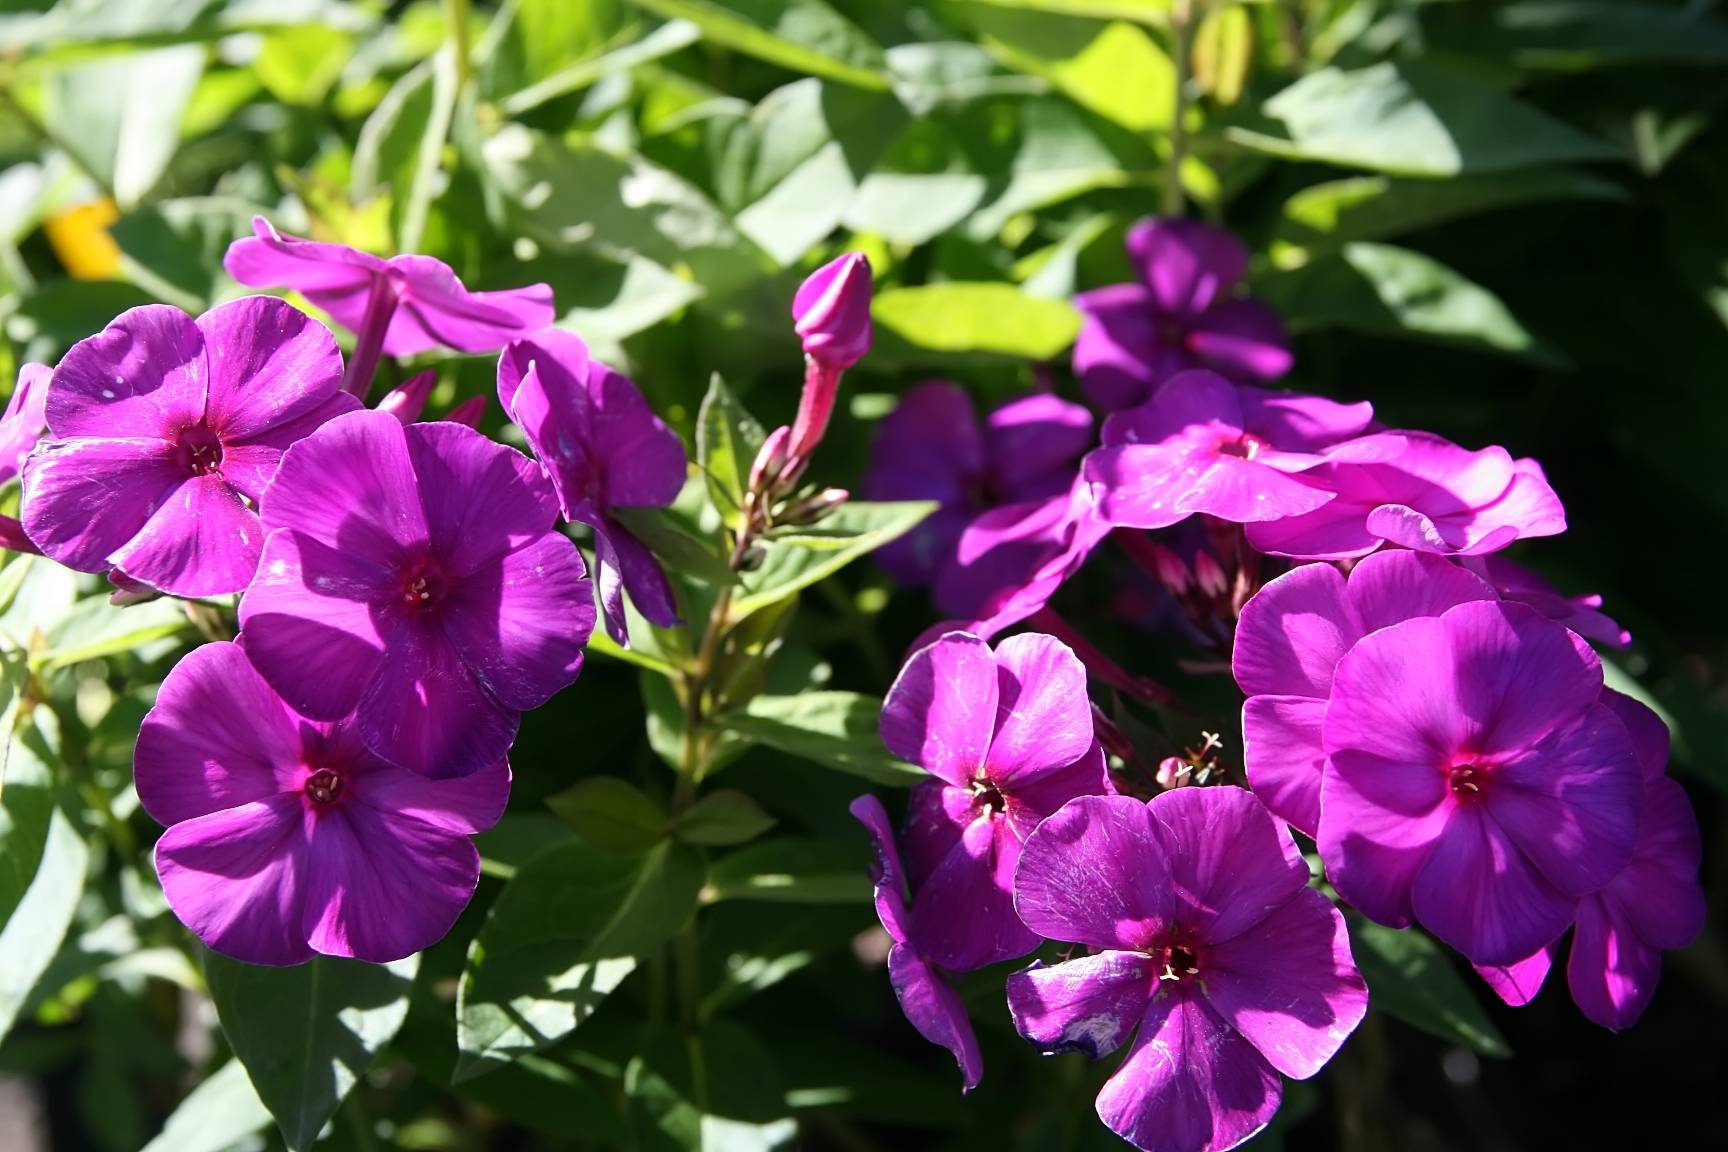 purple flowers and buds with green leaves and stems